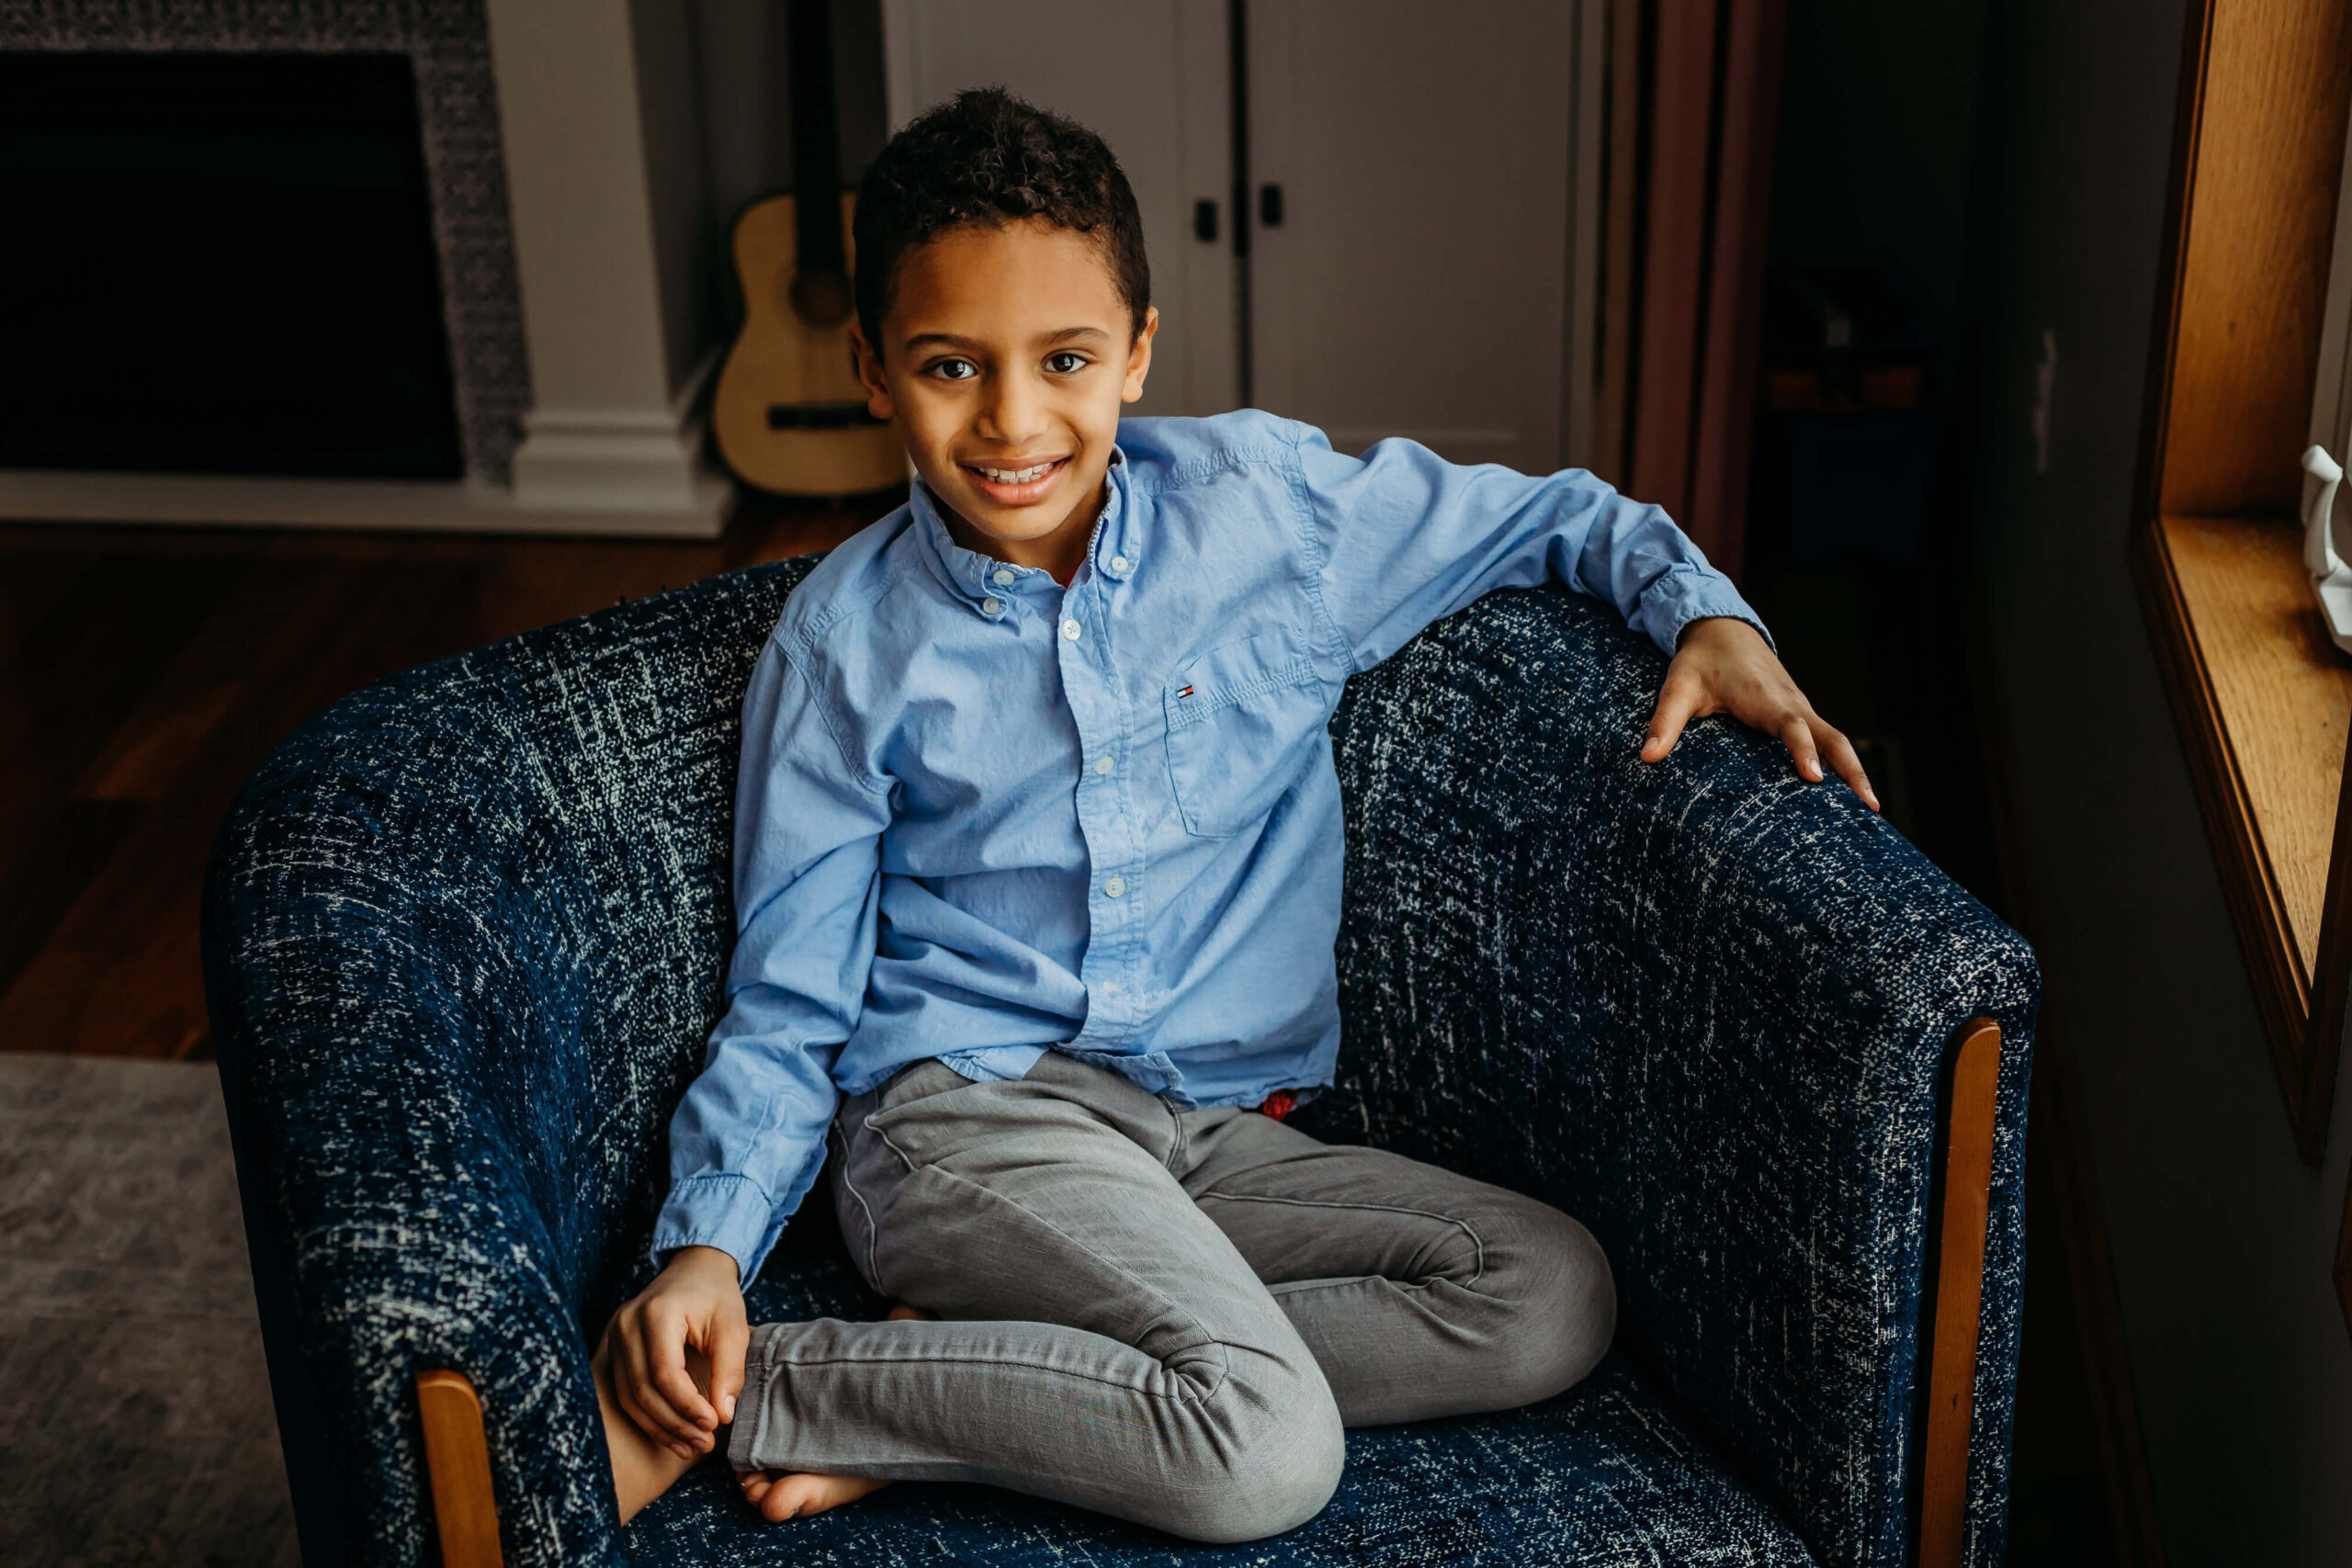 young boy in blue outfit sitting on a couch smiling Once Upon a Child Eau Claire